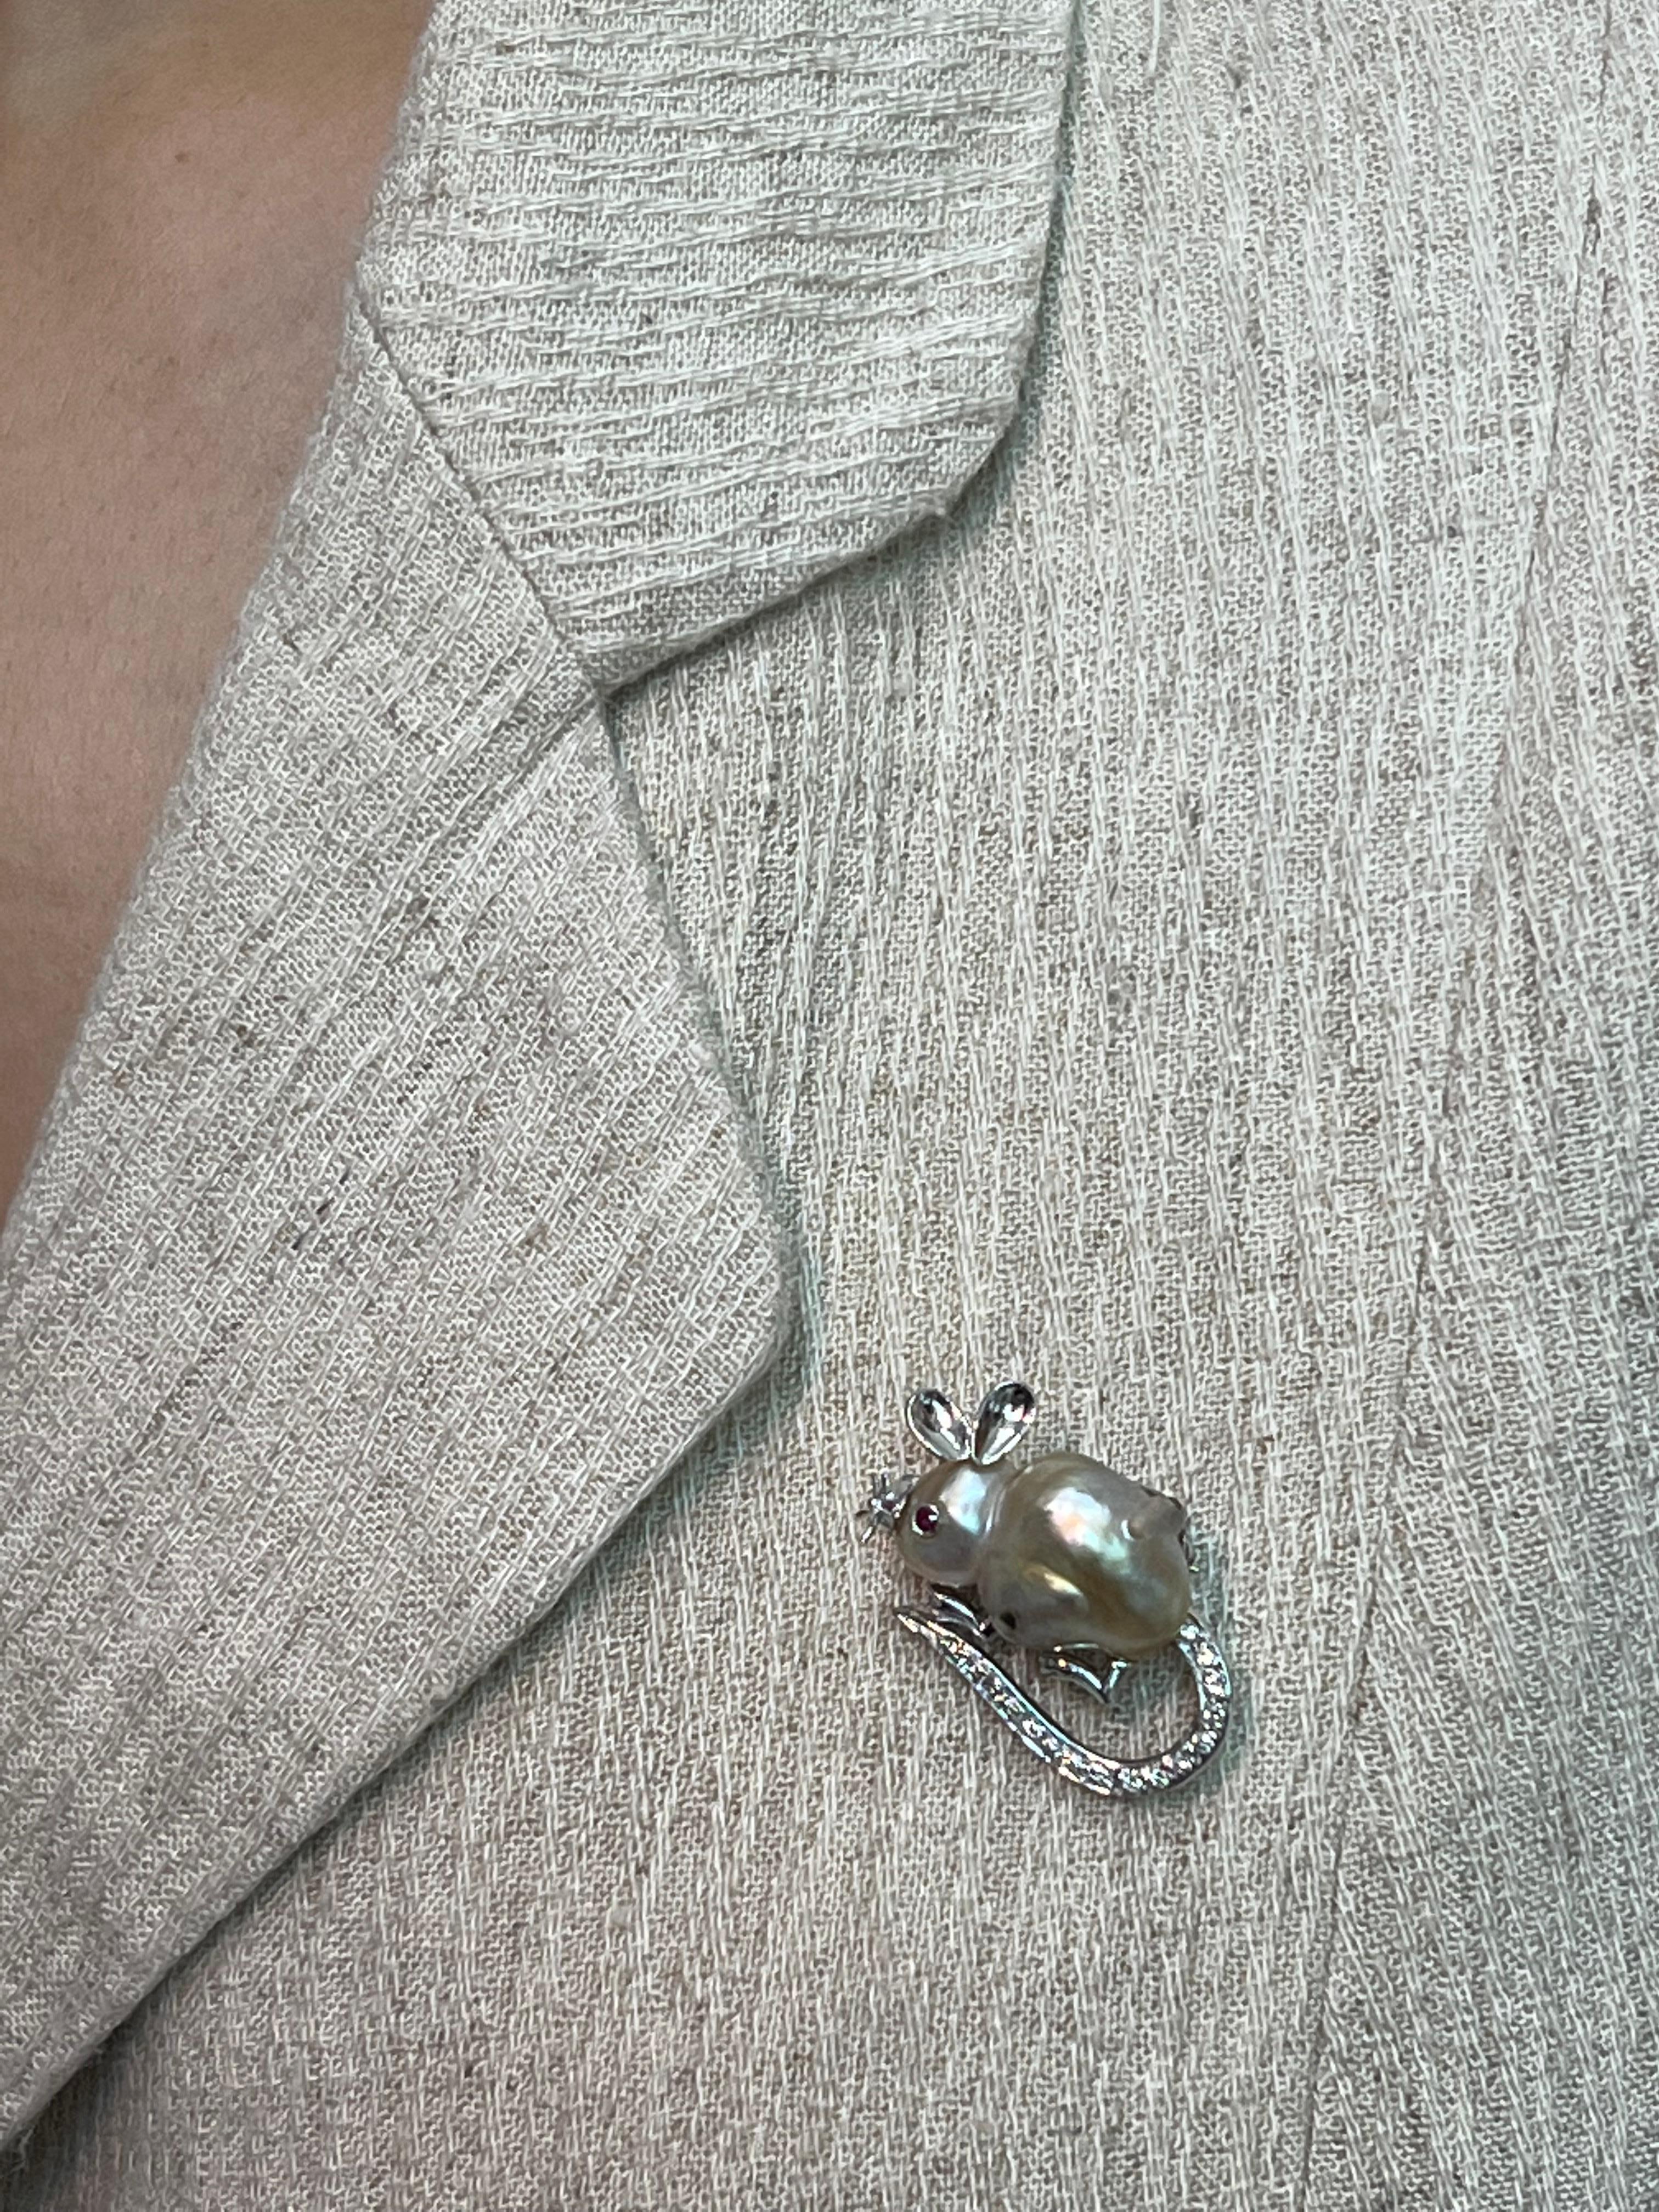 Please check out the HD video. This natural shaped culture pearl realistically resembles a mouse in this brooch. It looks good dressed up or down. The brooch is about 3cm x 1.7cm. This brooch is 18k white gold set with one freshwater pearl, 17 white